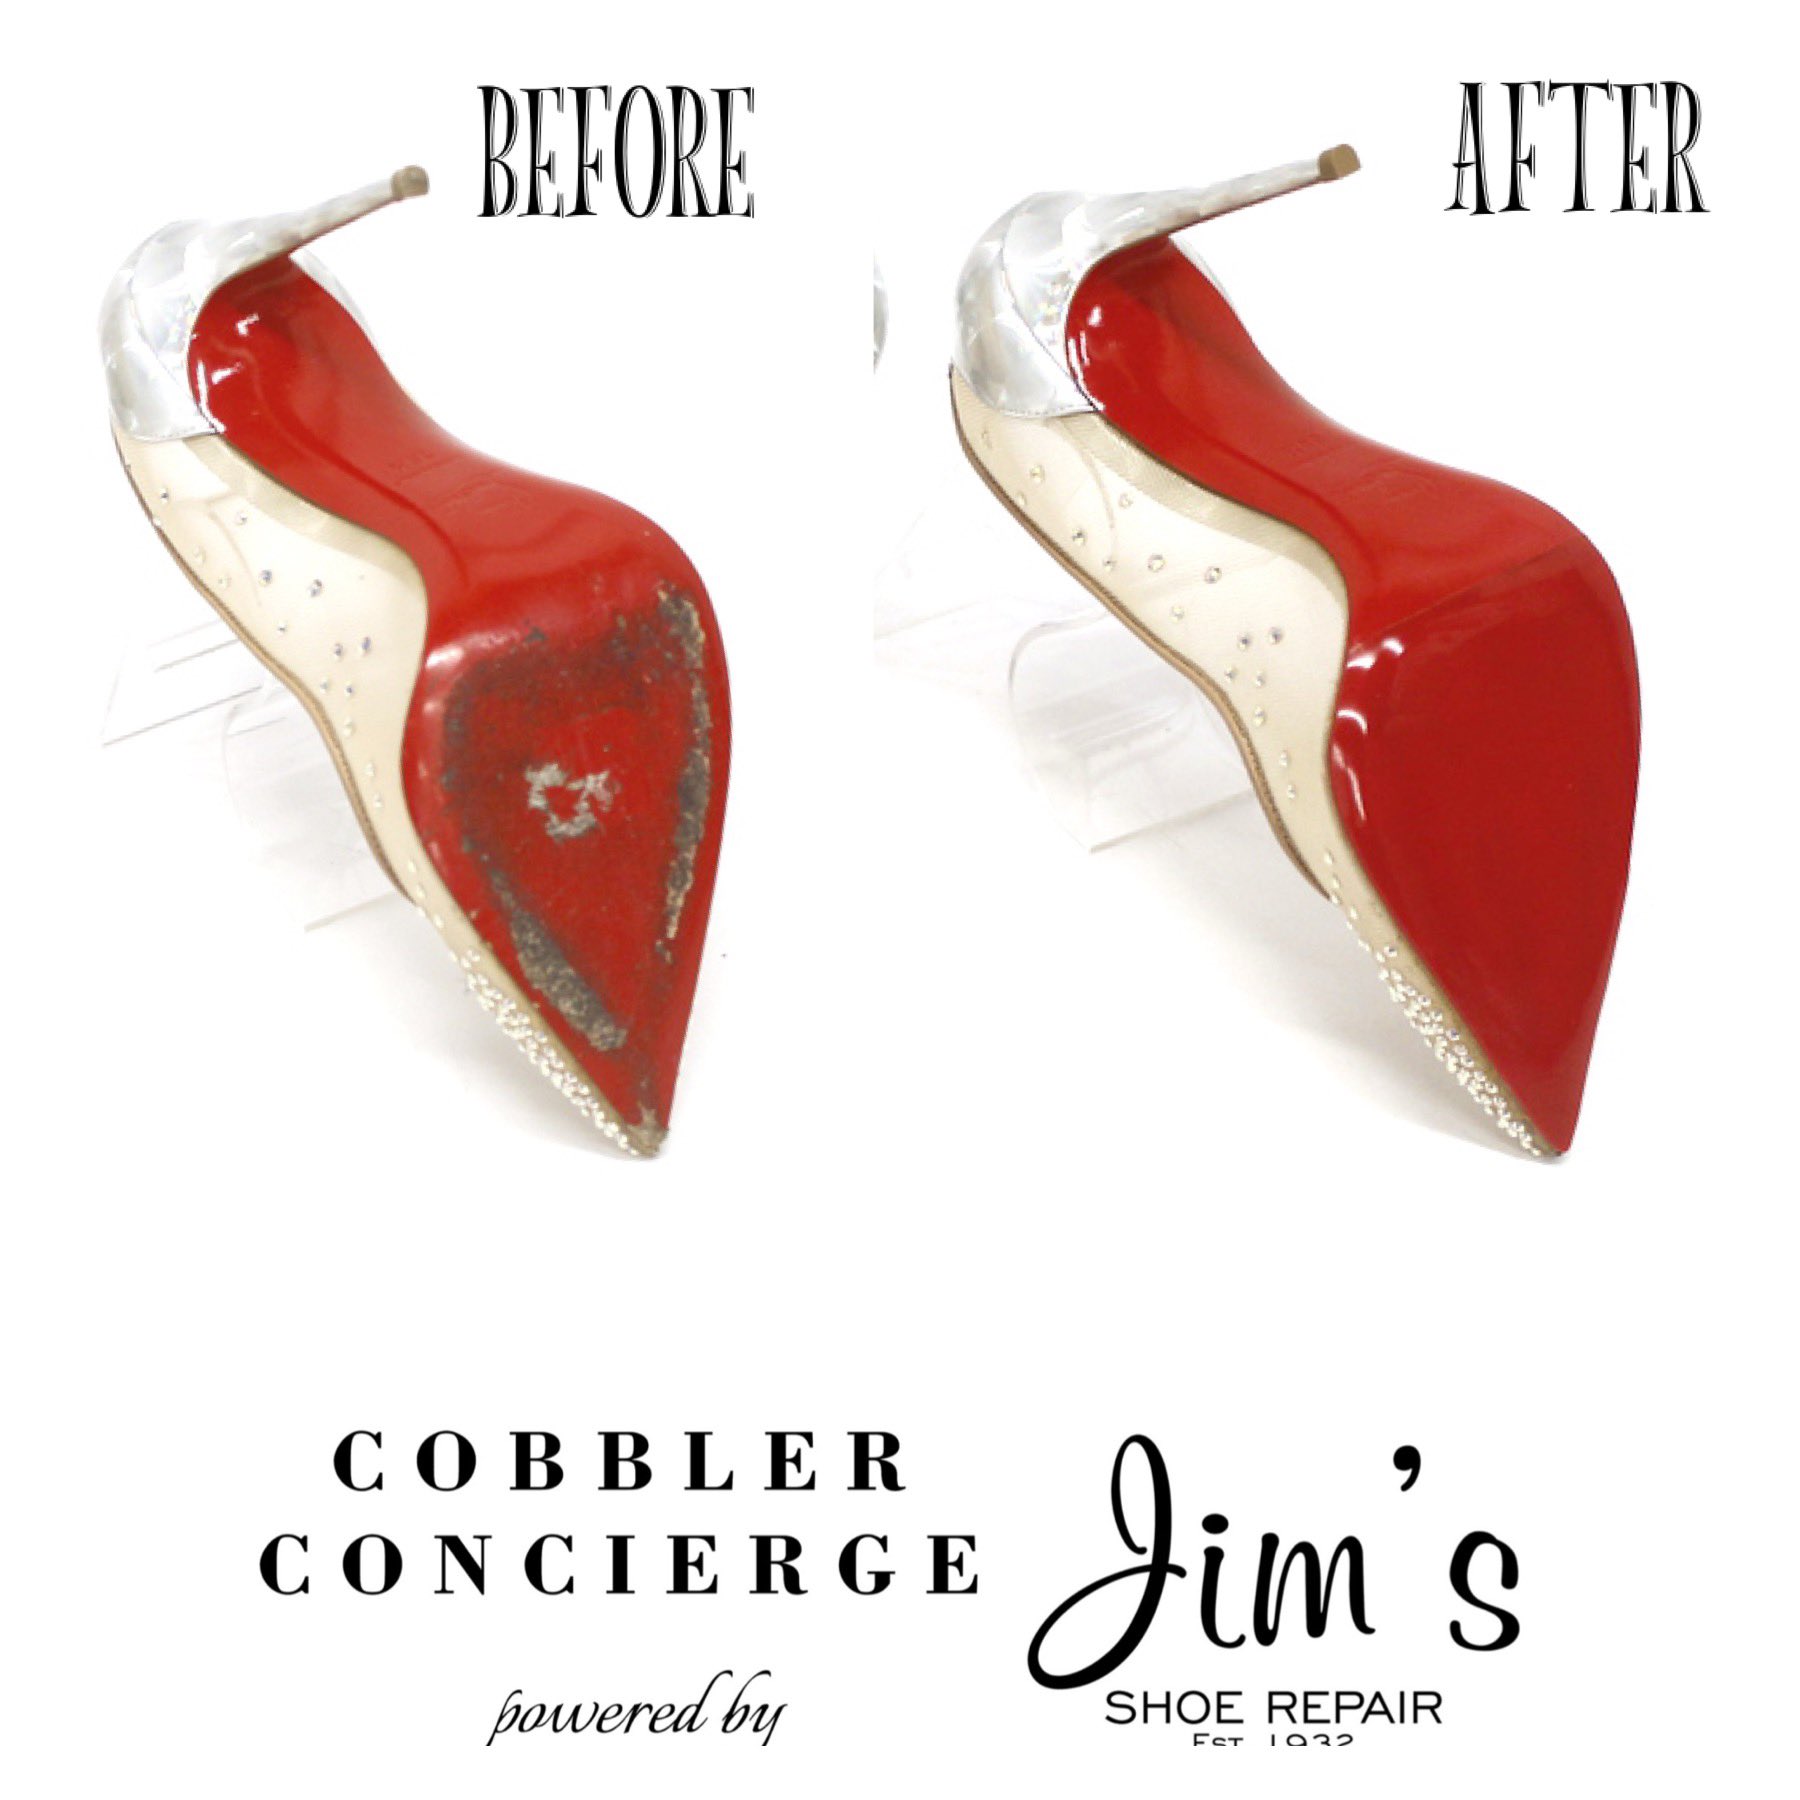 Louboutin – TheCobblers